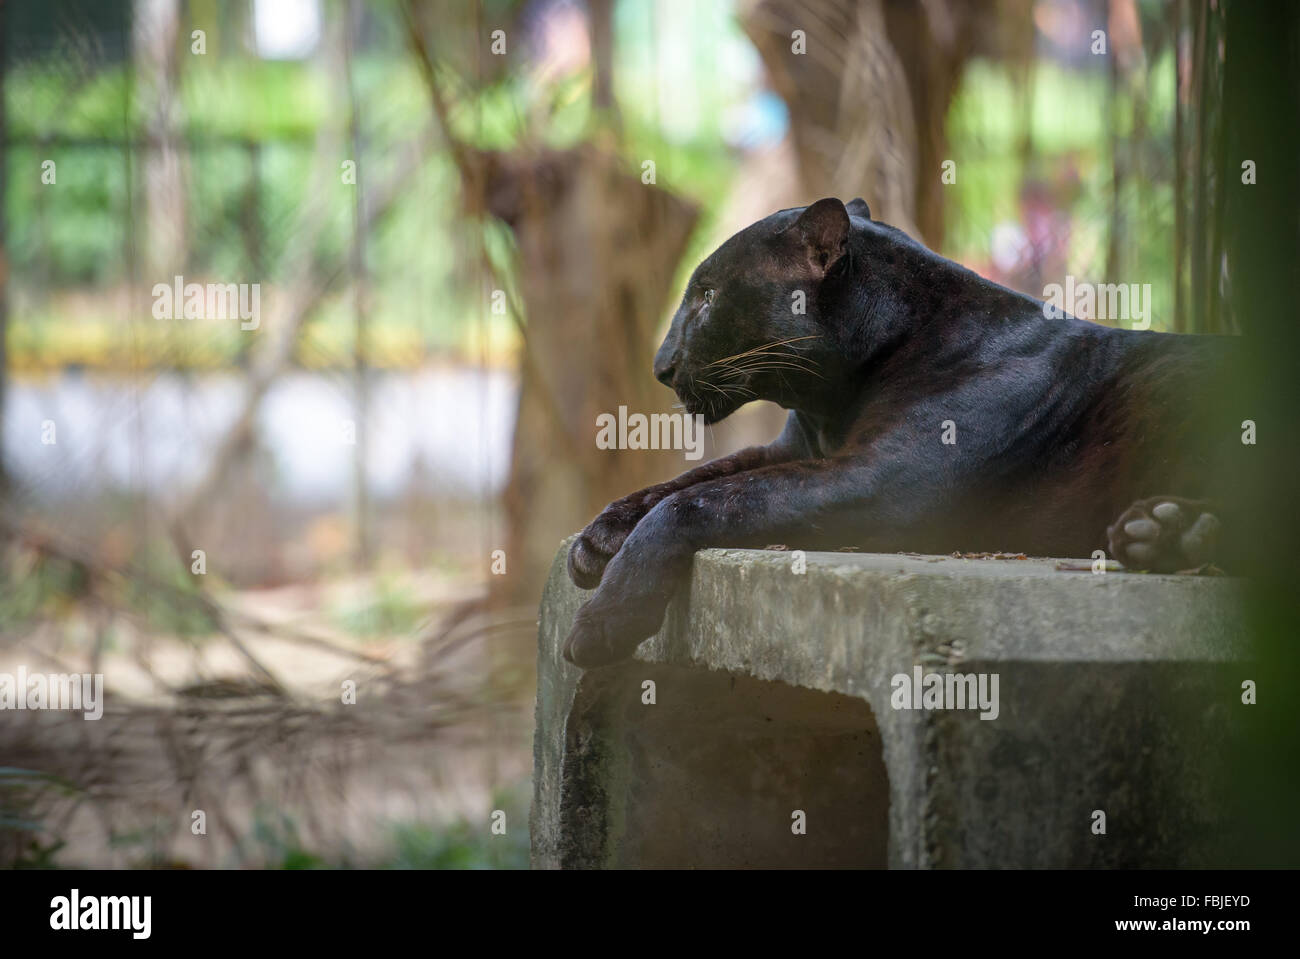 Black panther resting Stock Photo